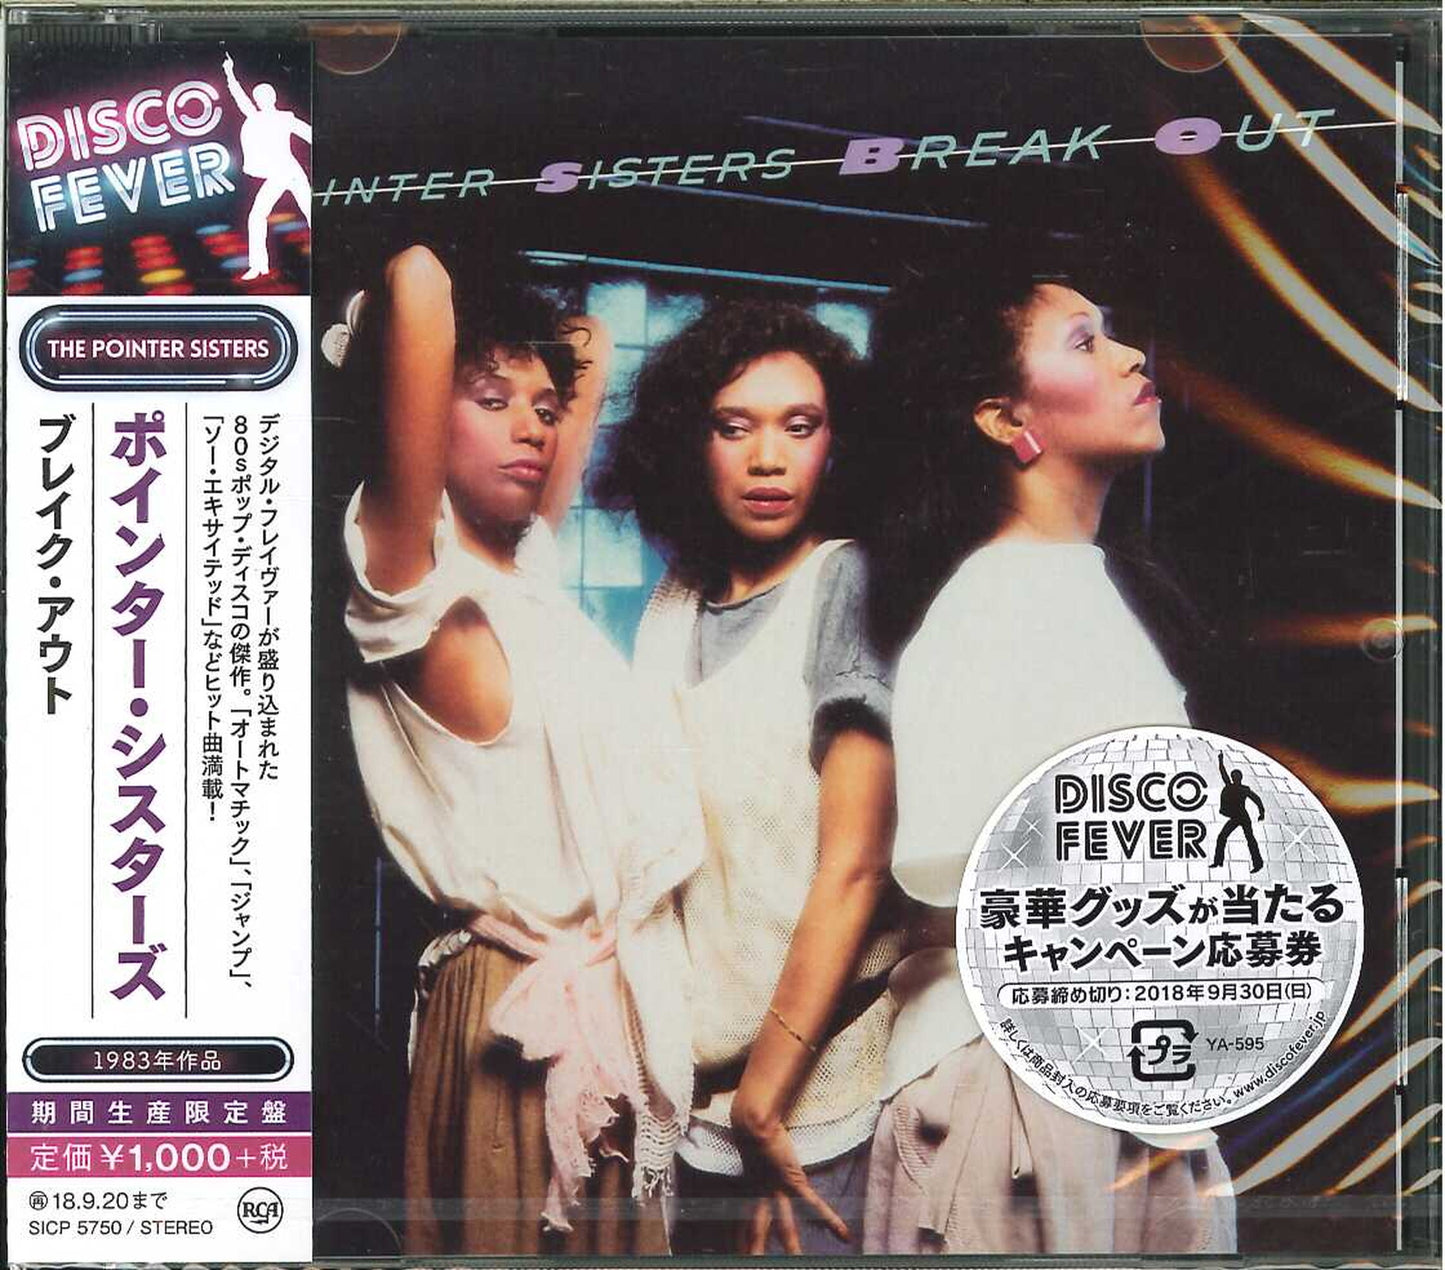 The Pointer Sisters - Break Out - Japan  CD Bonus Track Limited Edition